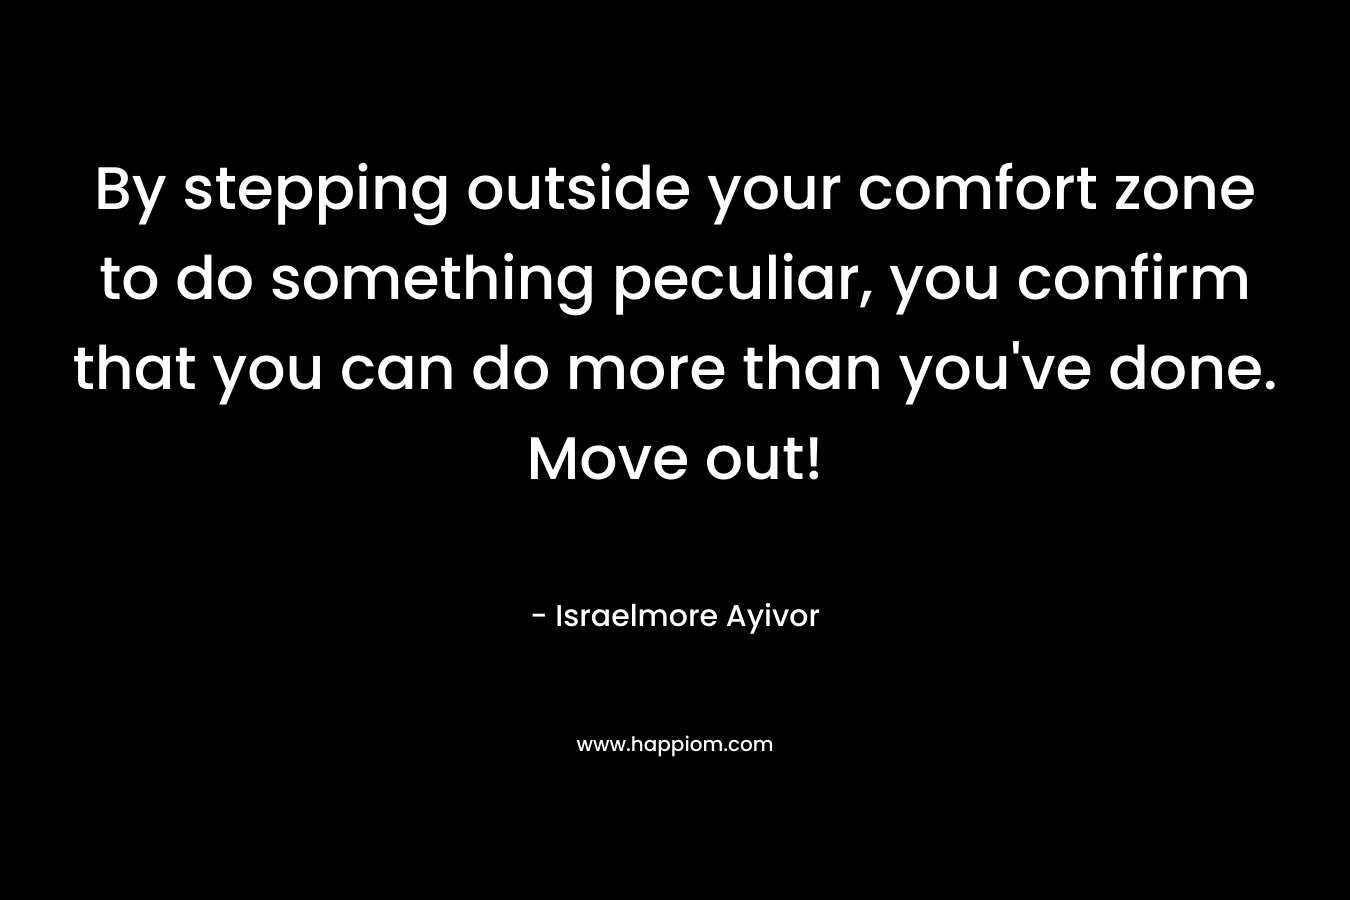 By stepping outside your comfort zone to do something peculiar, you confirm that you can do more than you've done. Move out!